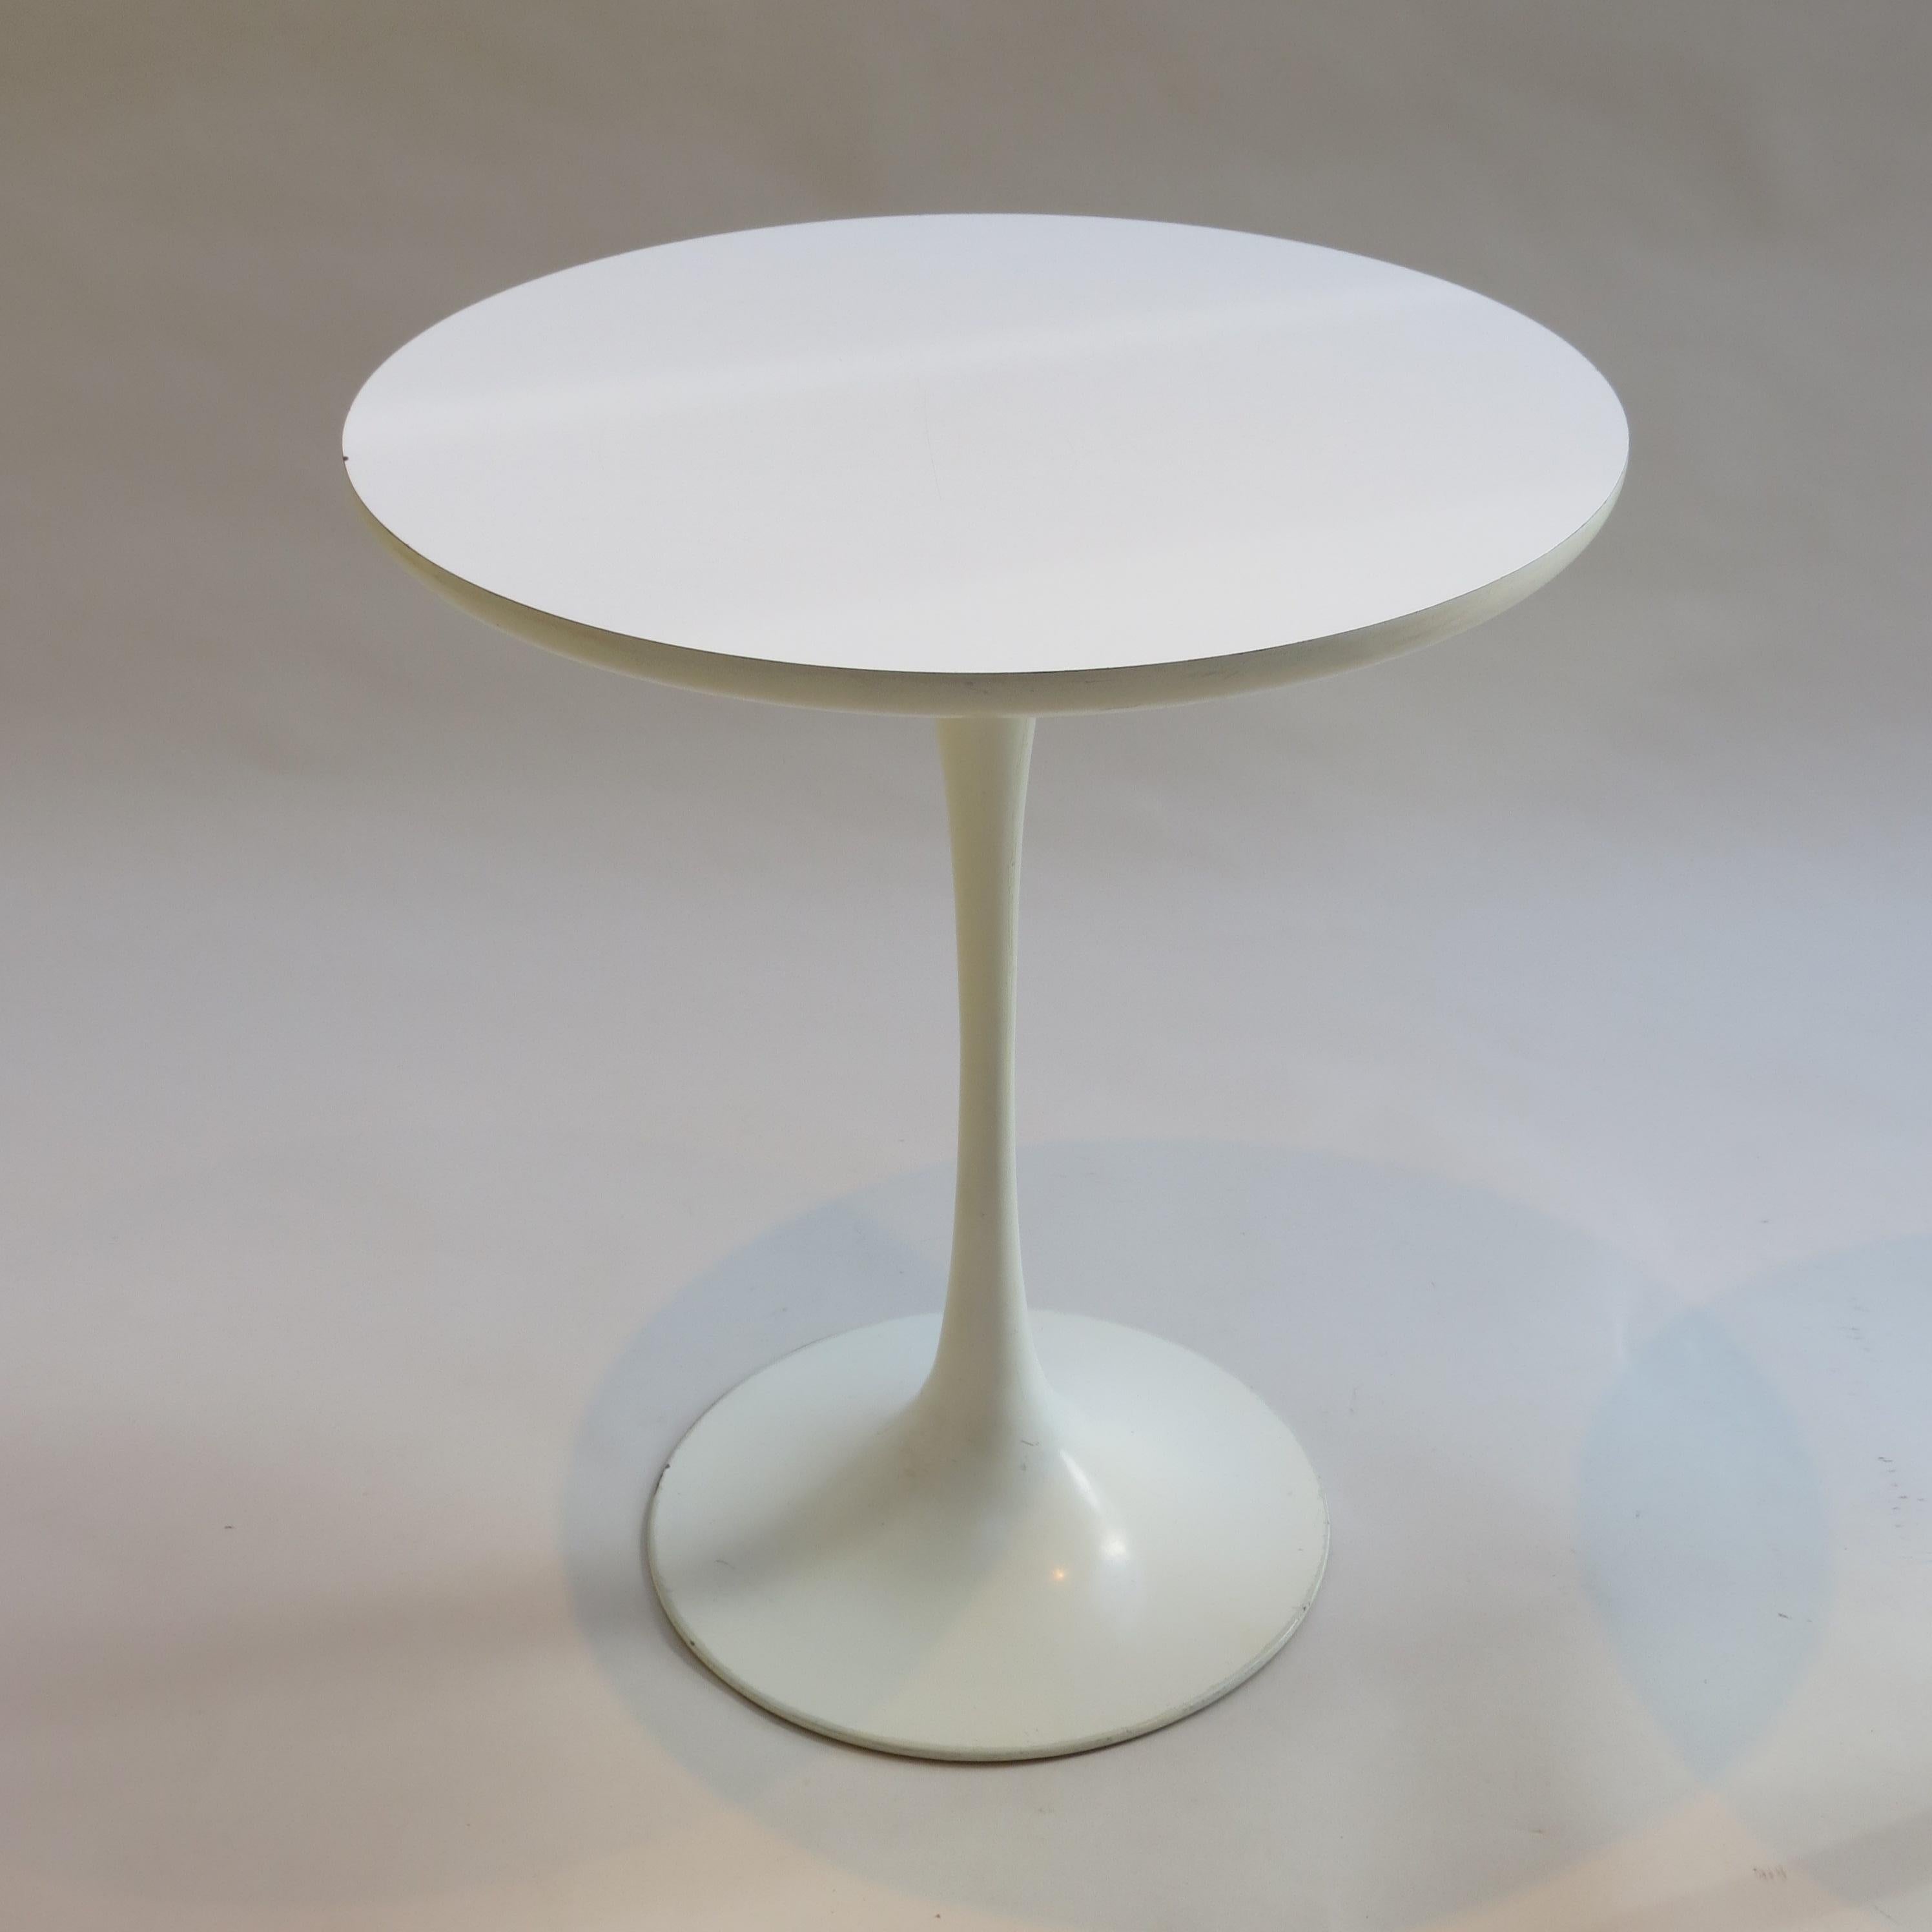 1960s Tulip side table designed by Maurice Burke for Arkana, Bath, UK.

Cast aluminium base and circular laminate top.

Some wear and chips to the base, tops in vintage condition, one small chip to the edge of one table.

Stamped to underside